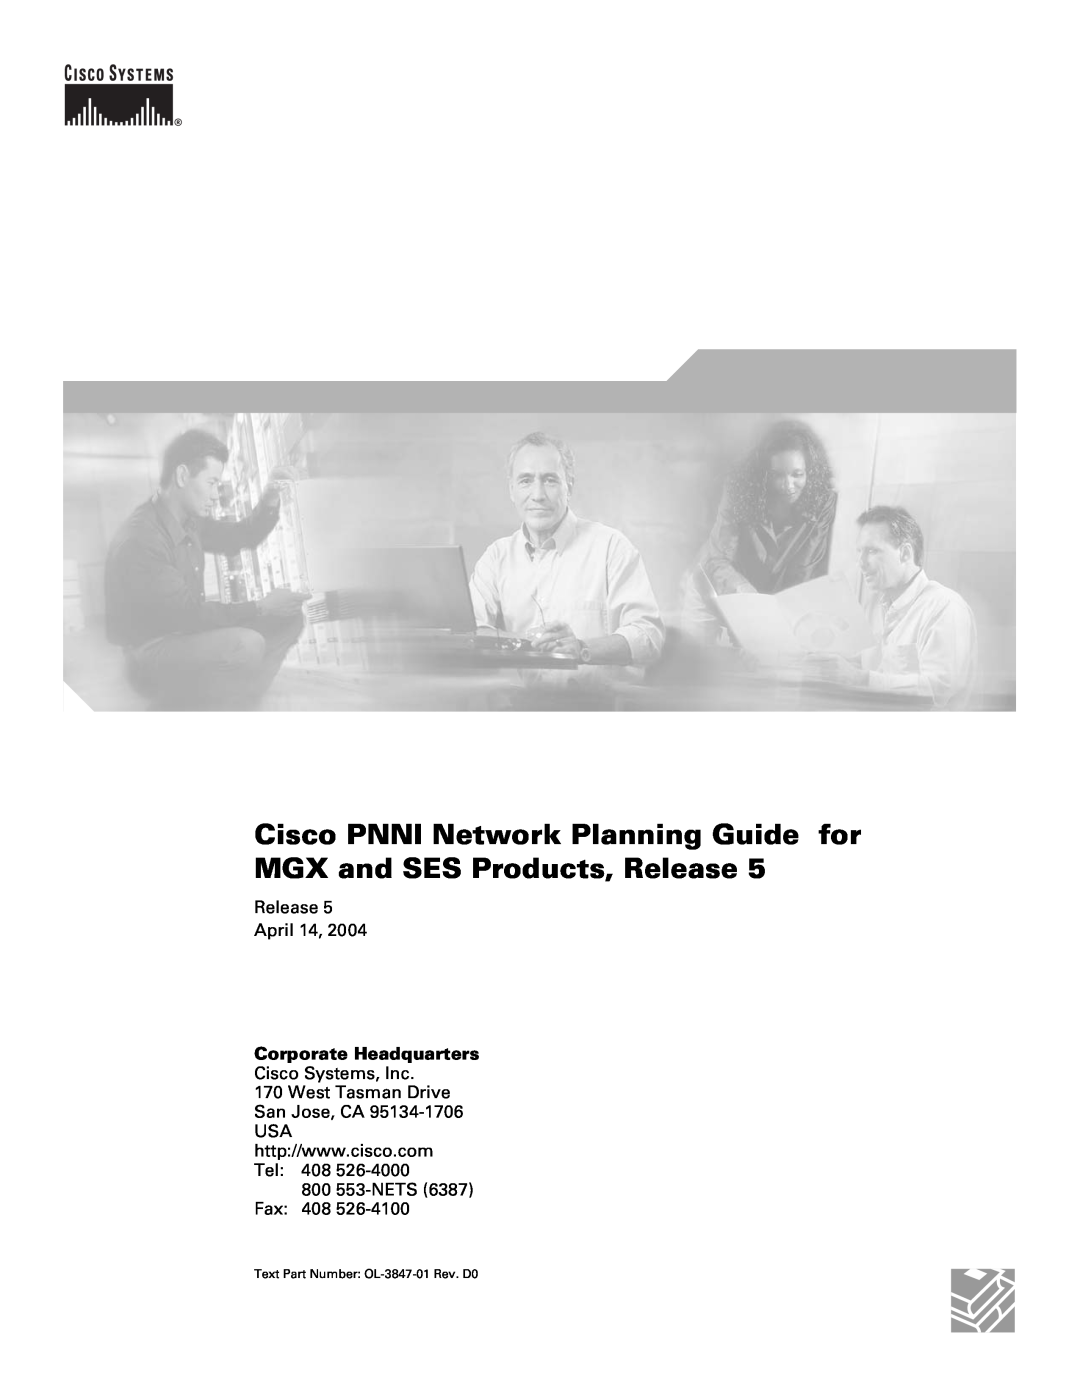 Cisco Systems Network Router manual Cisco PNNI Network Planning Guide for MGX and SES Products, Release, Release April 14 